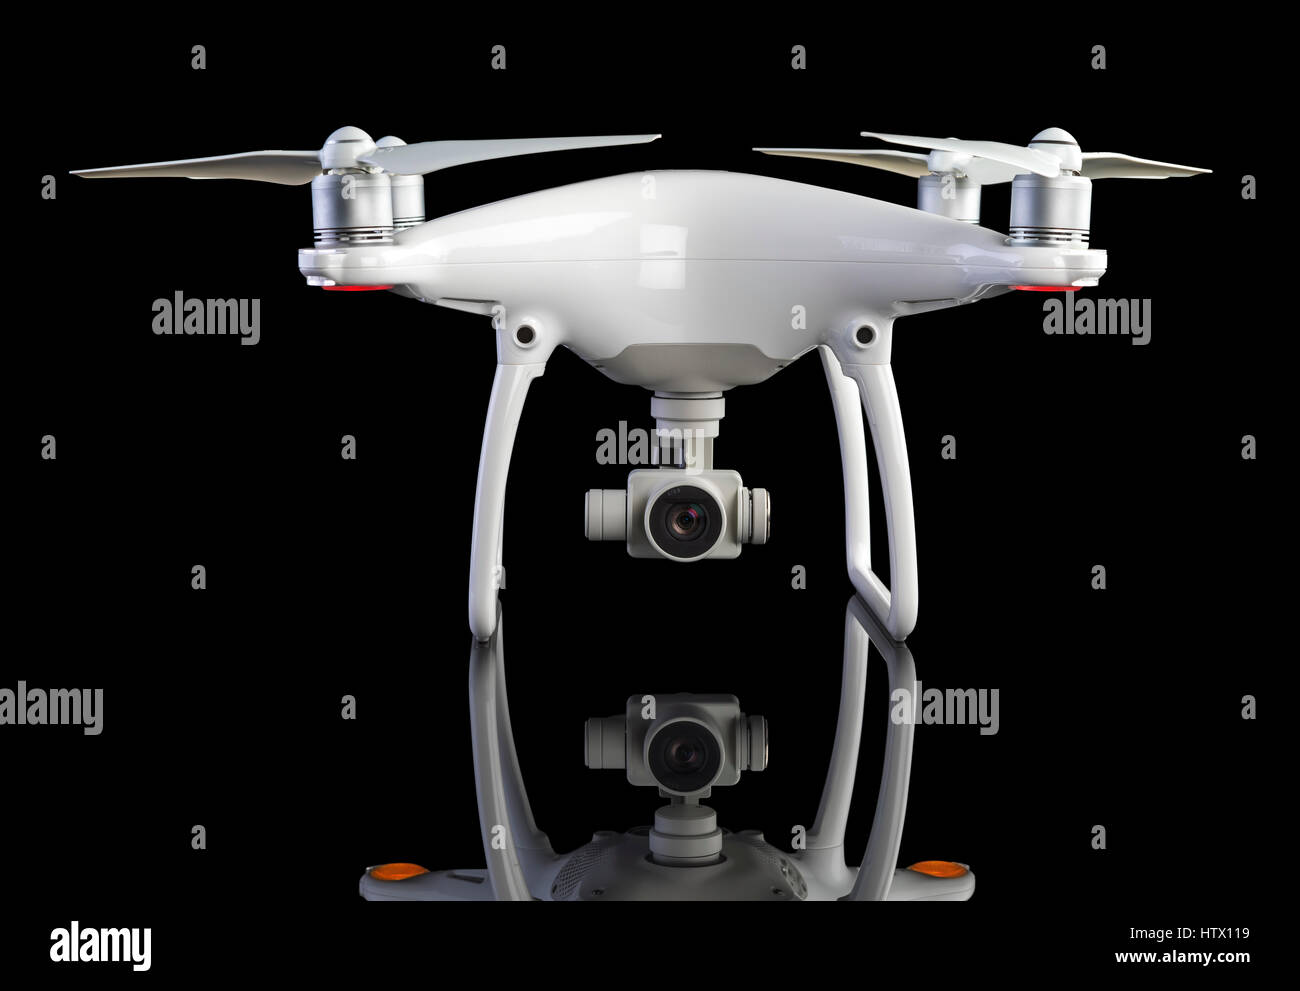 White drone against black background Stock Photo